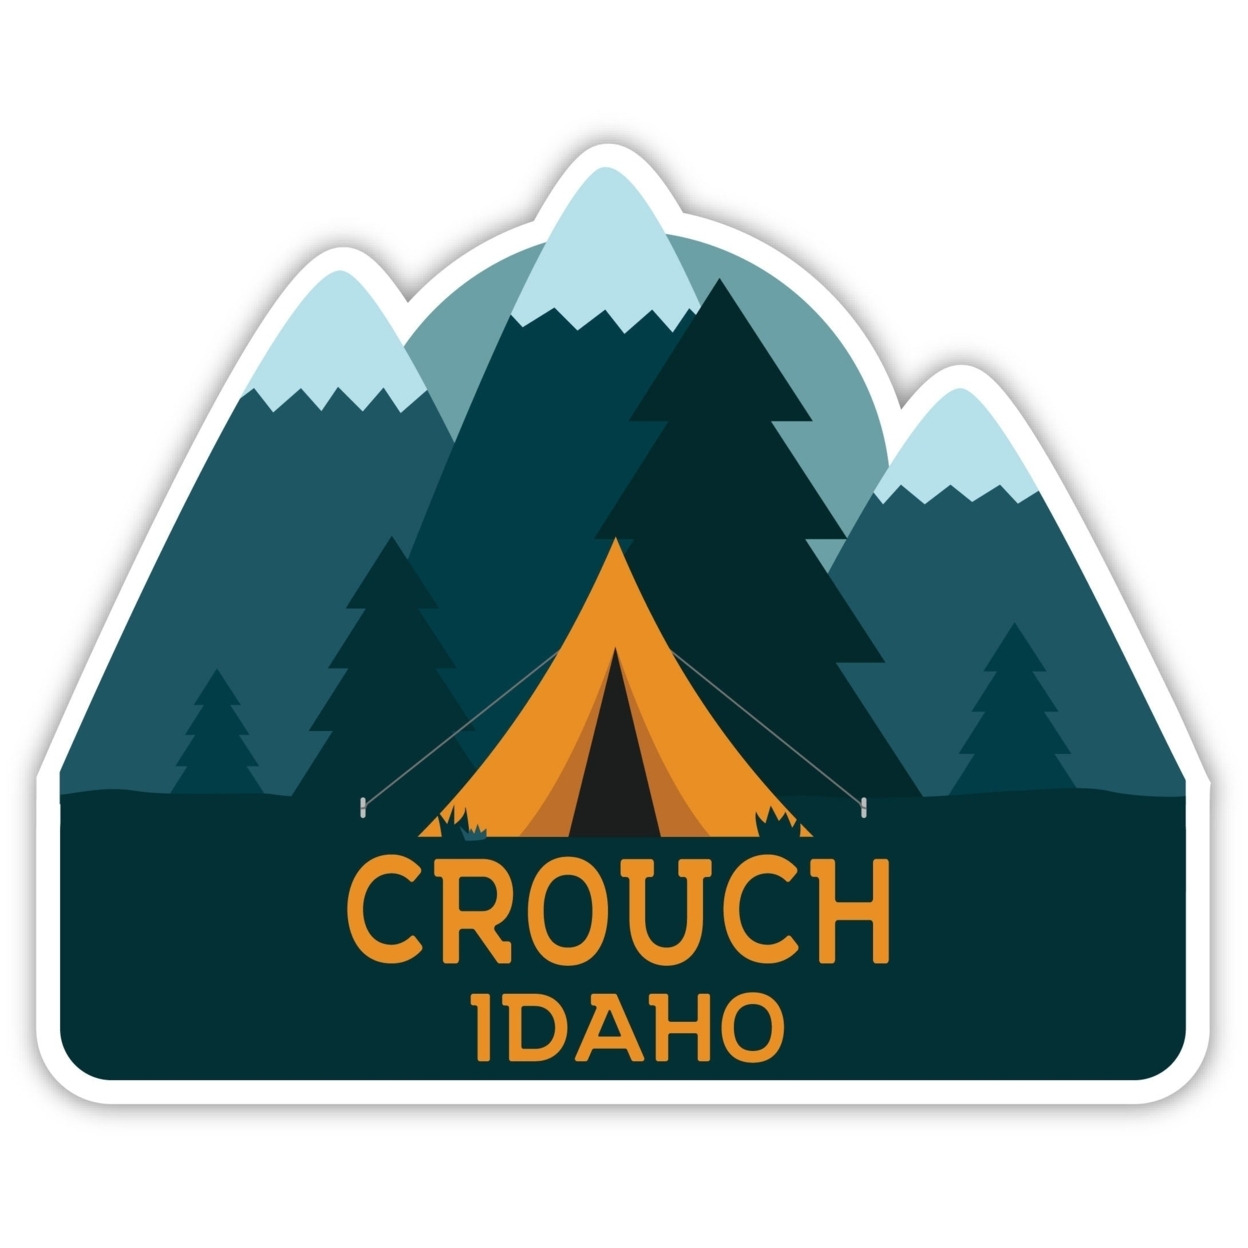 Crouch Idaho Souvenir Decorative Stickers (Choose Theme And Size) - 4-Pack, 6-Inch, Tent